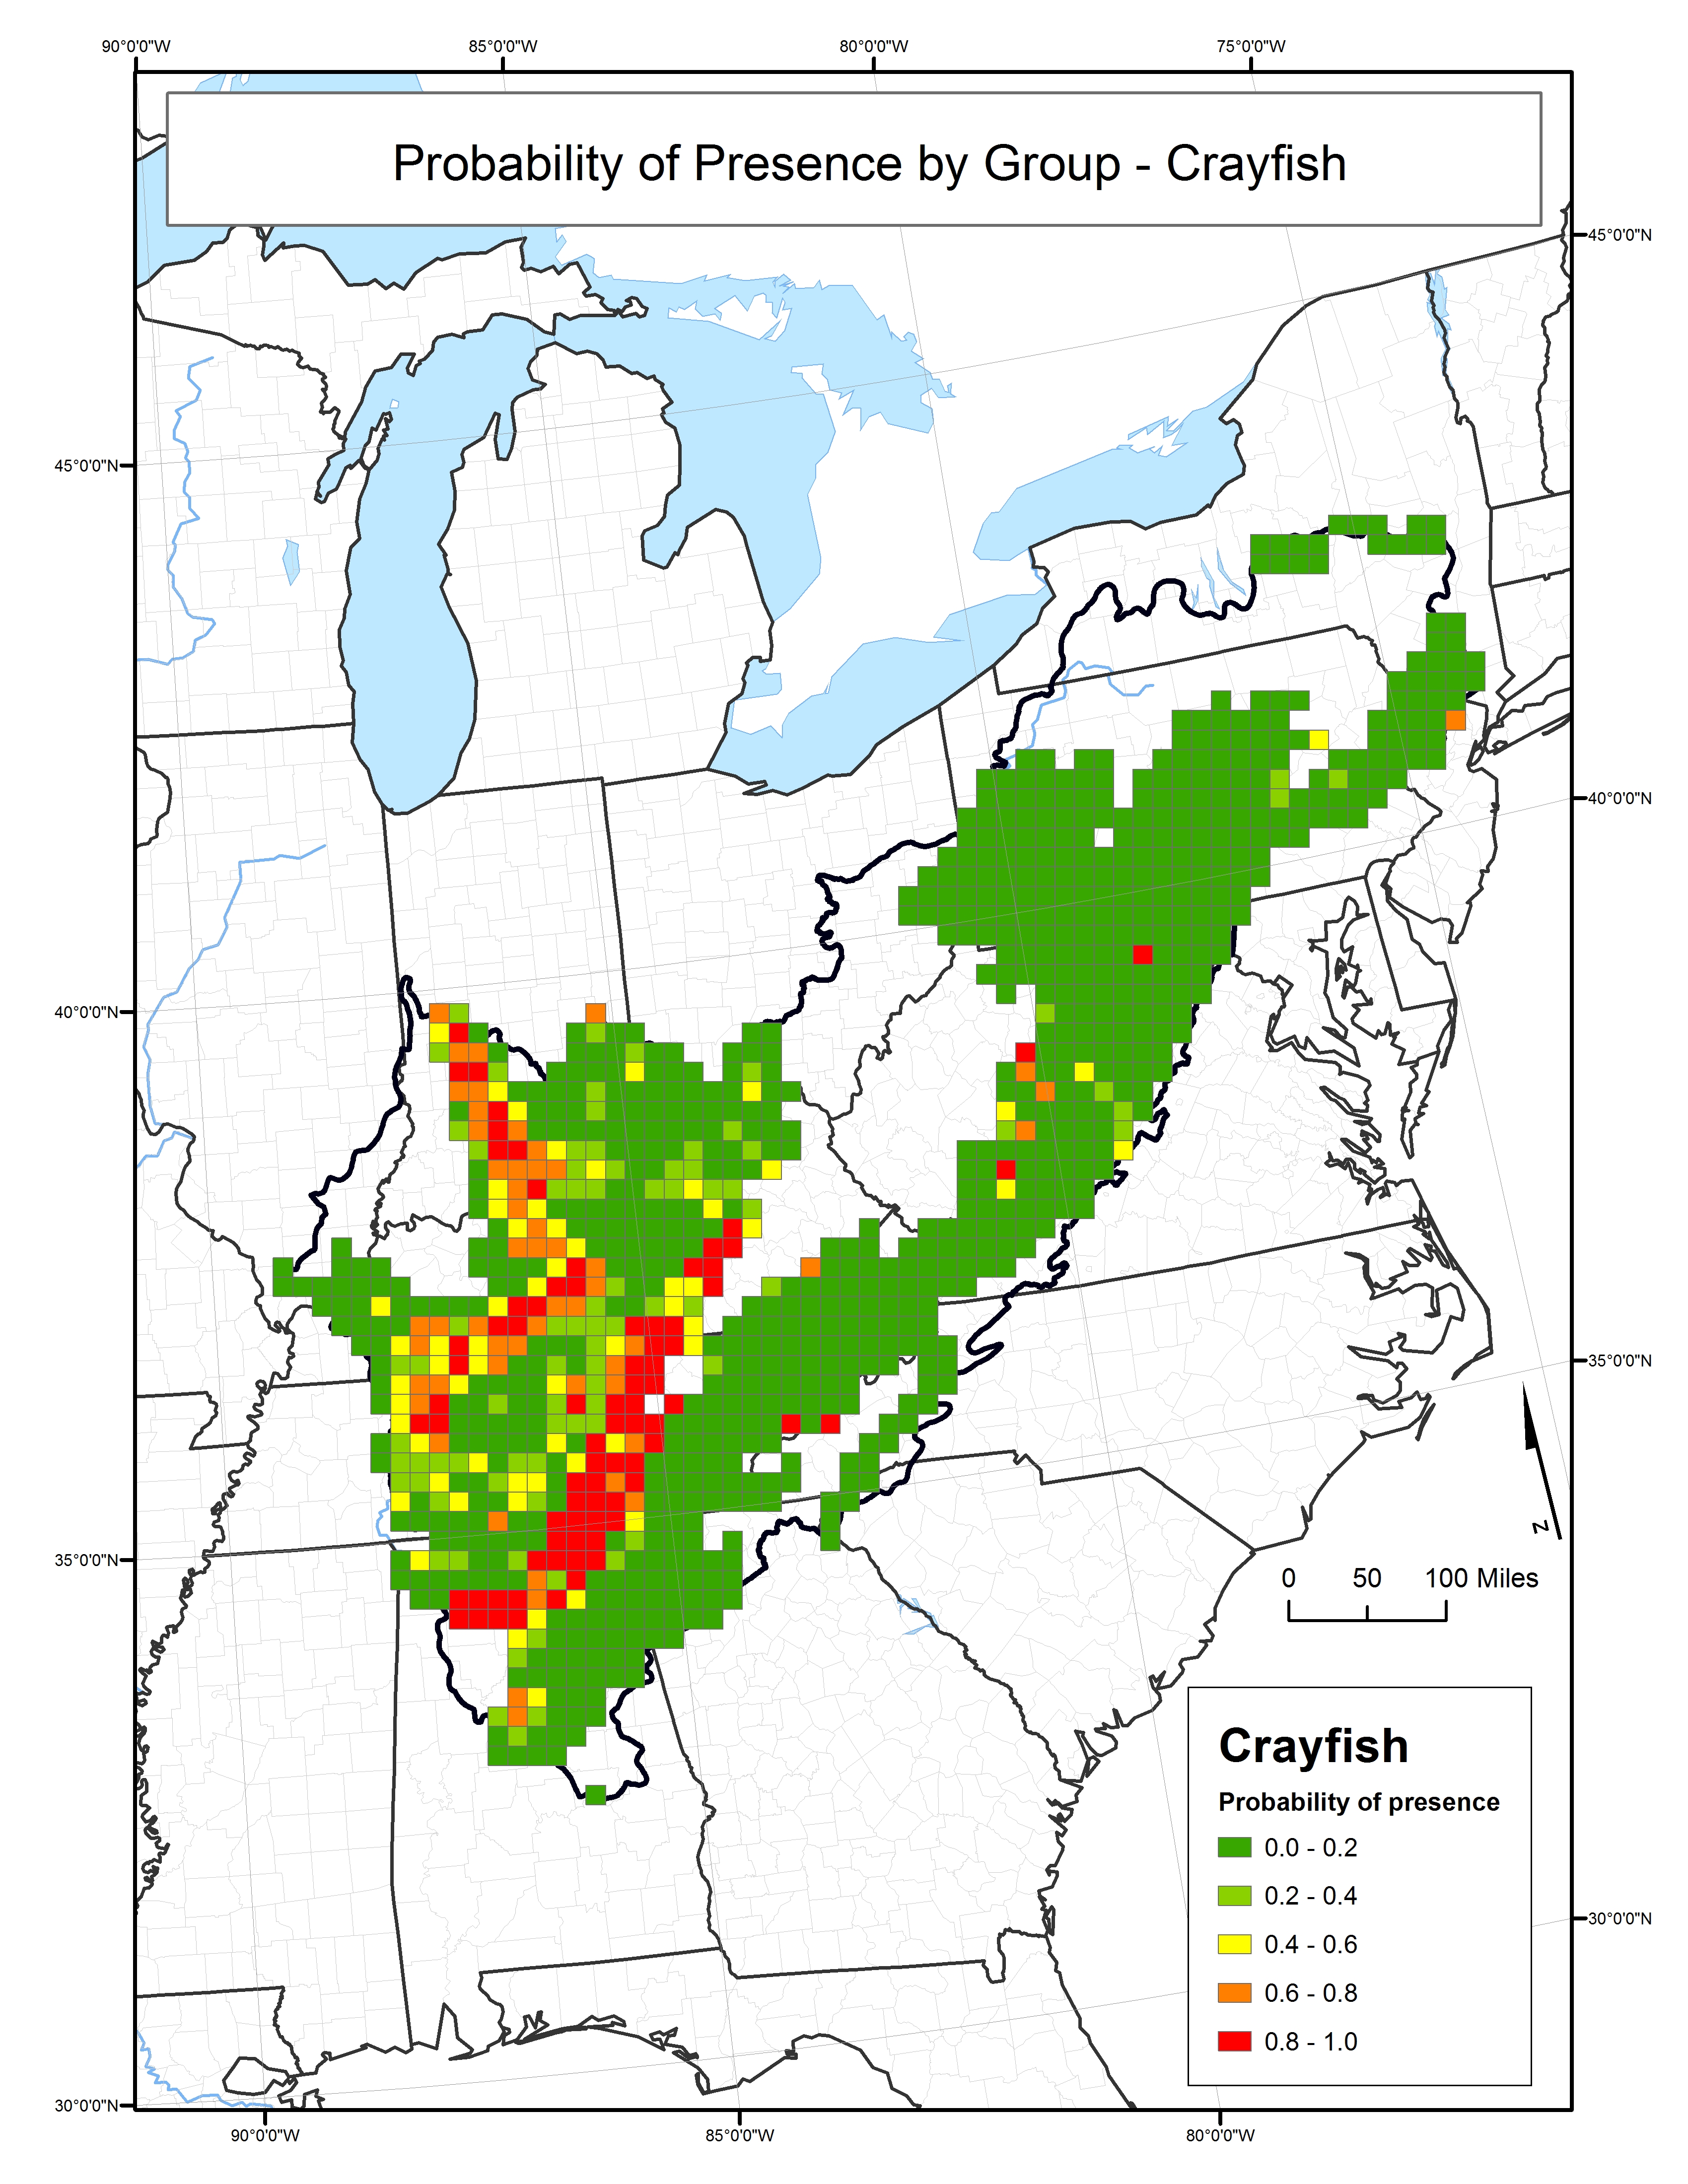 Probability of Presence for Crayfish